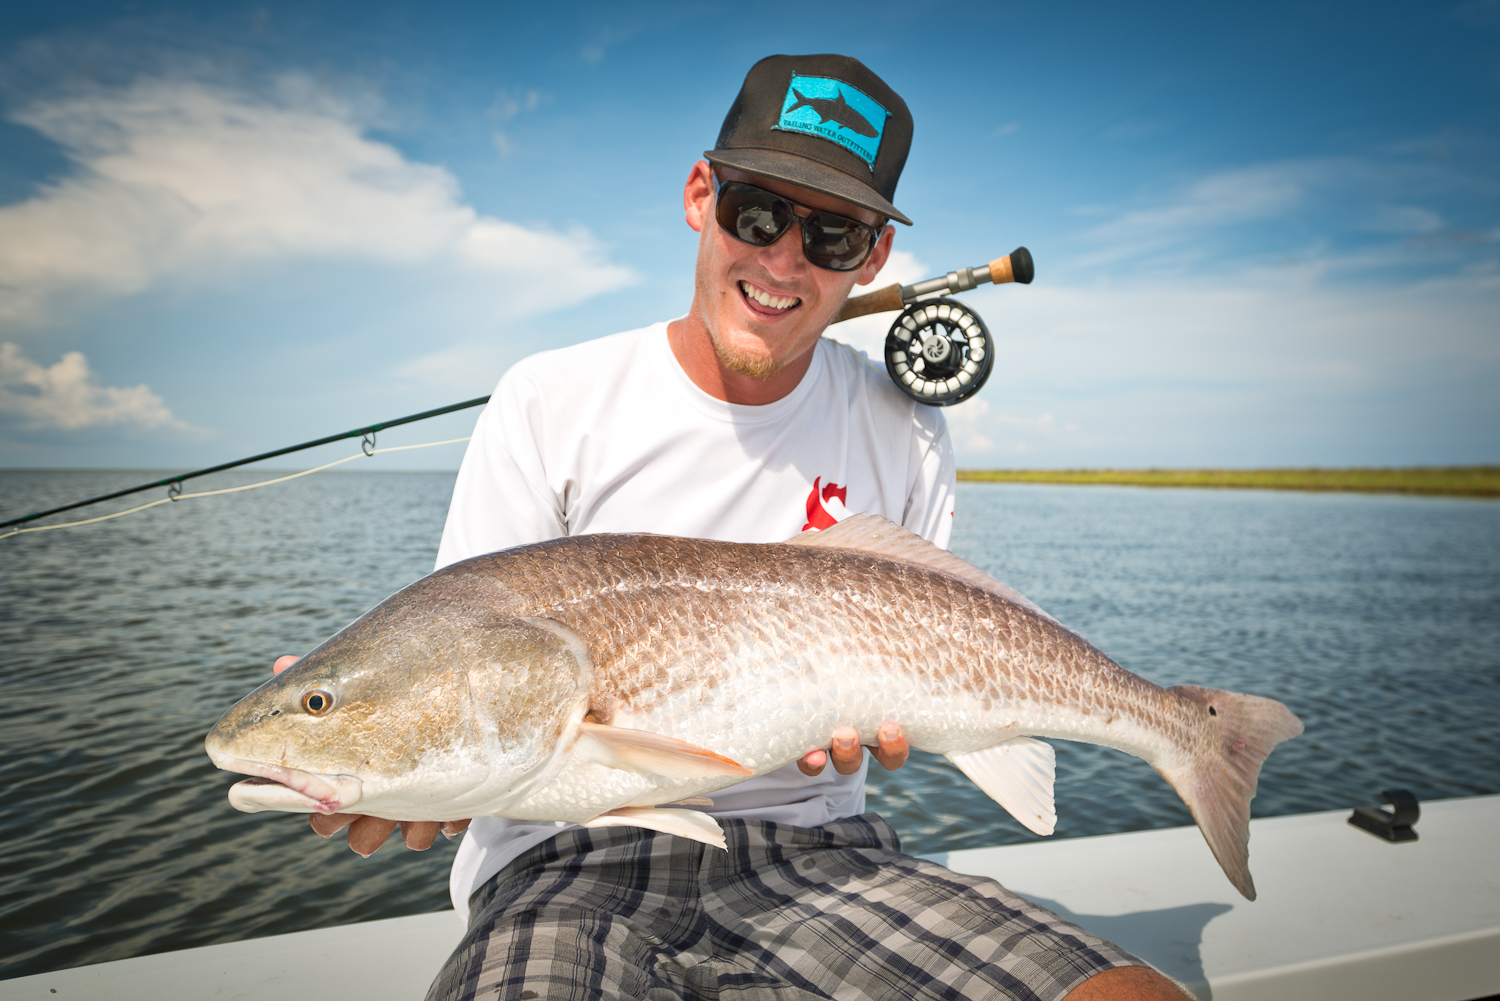 Southern_Fly_Expeditions_Fly_Fishing_Louisiana_Redfish_Eric-Scott-20Aug2015-10.jpg